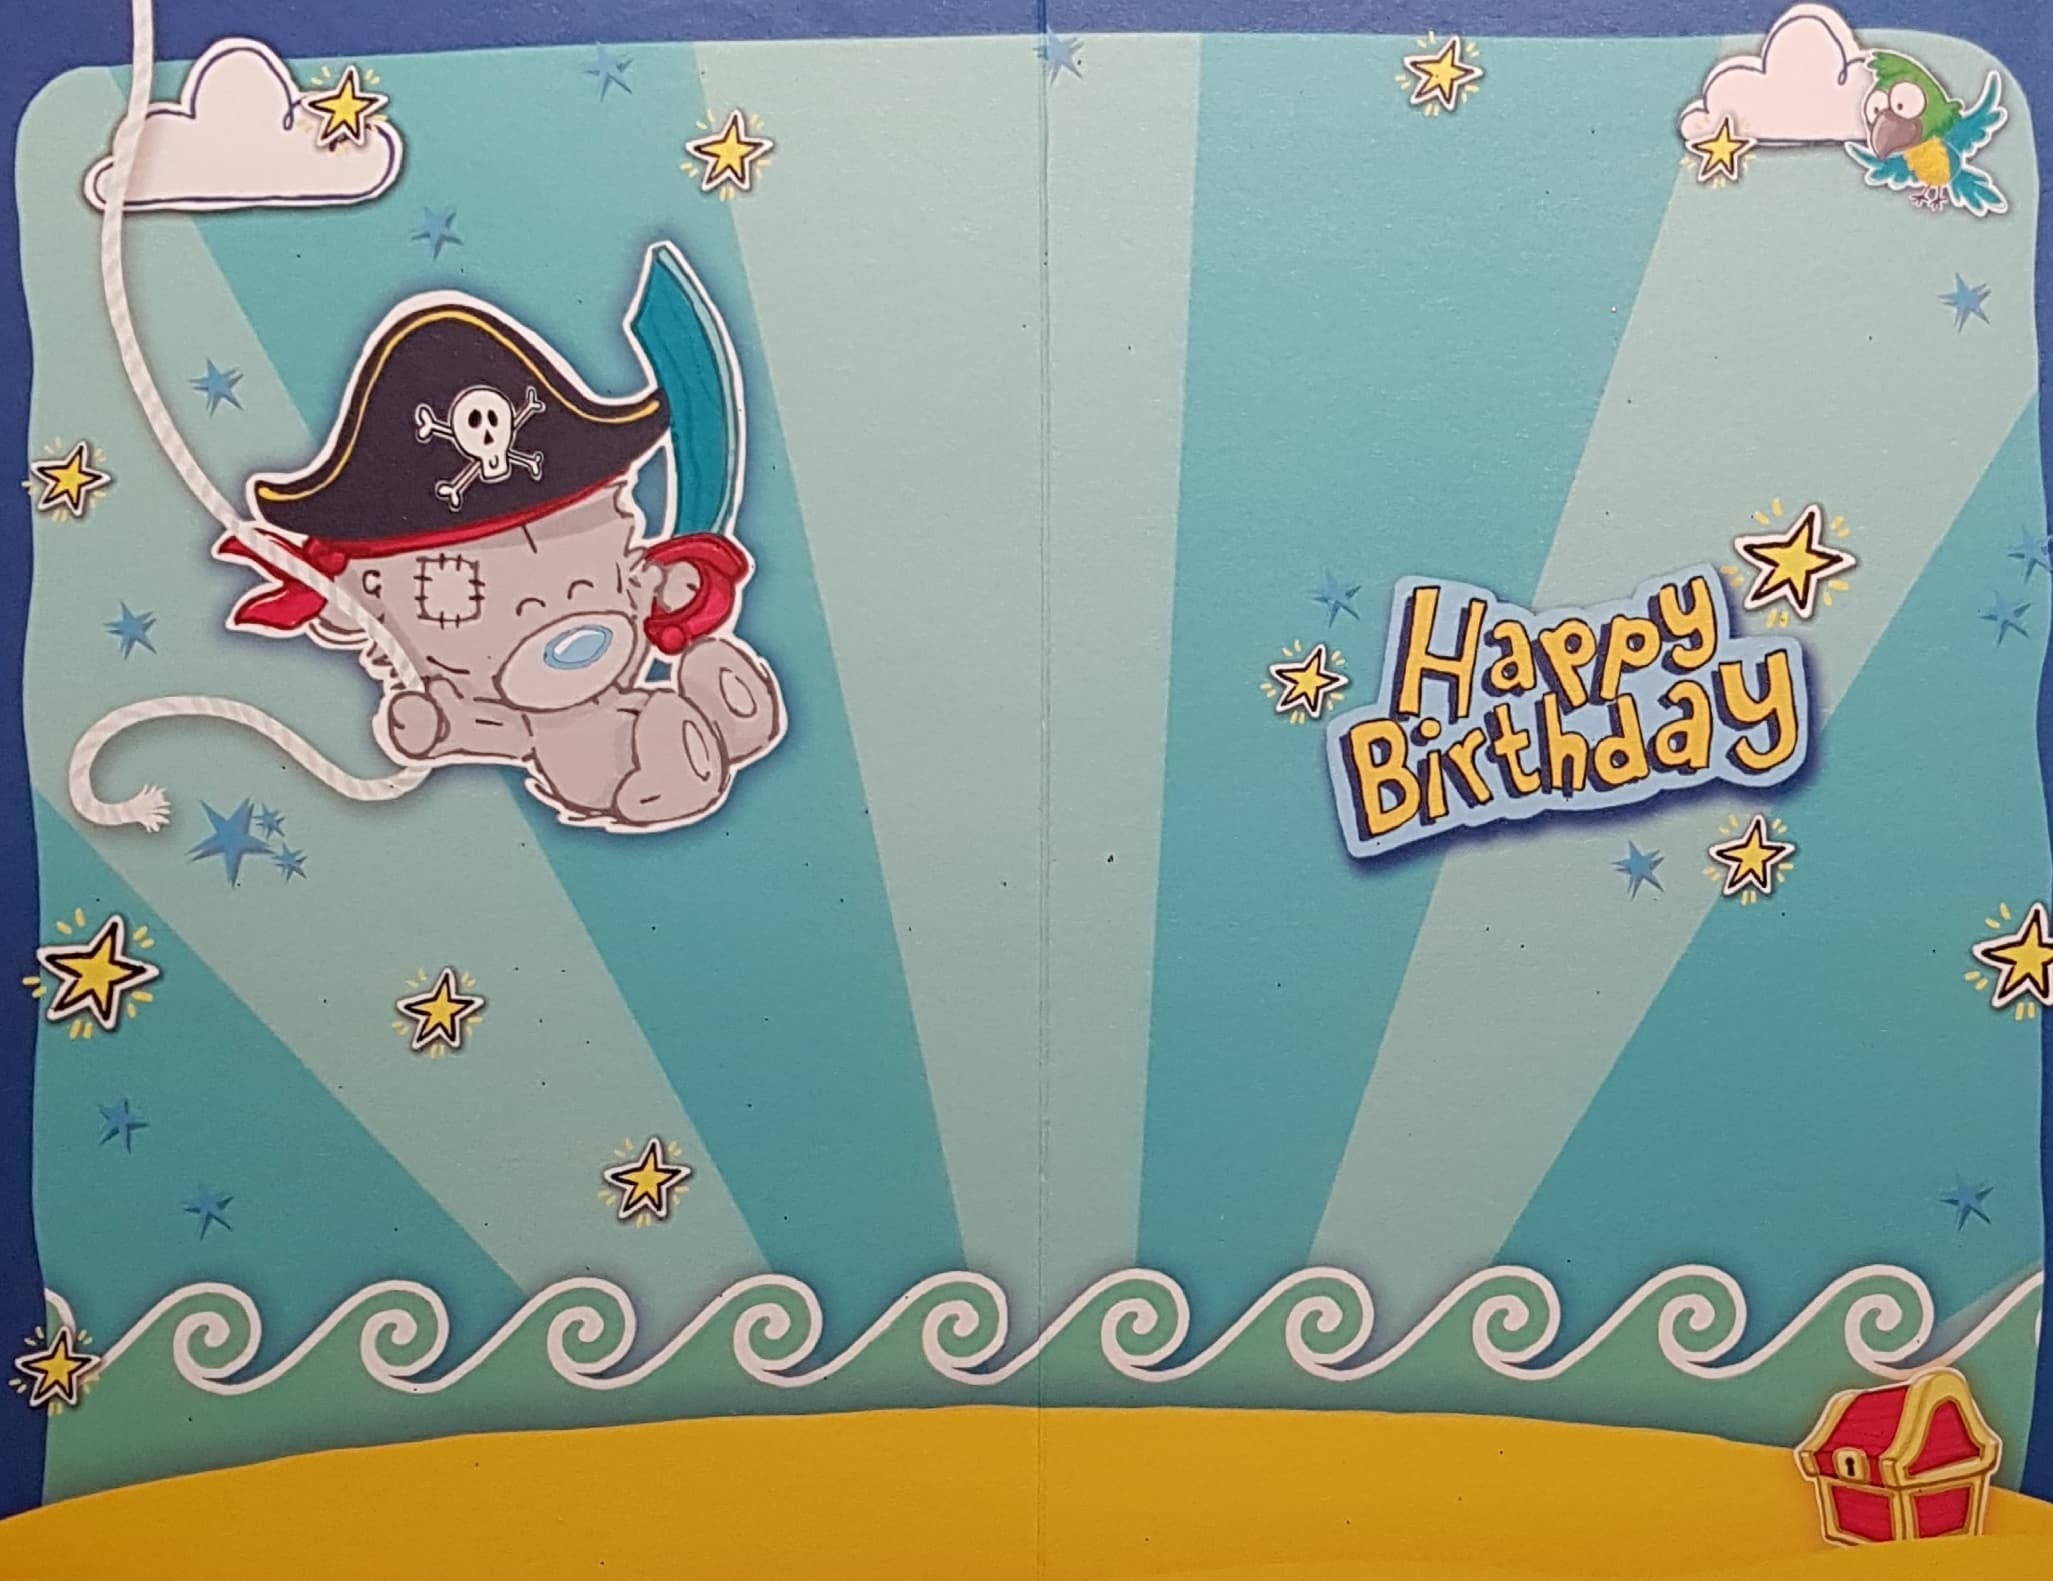 Age 4 Birthday Card - Pirate Teddy On Island With A Treasure Chest